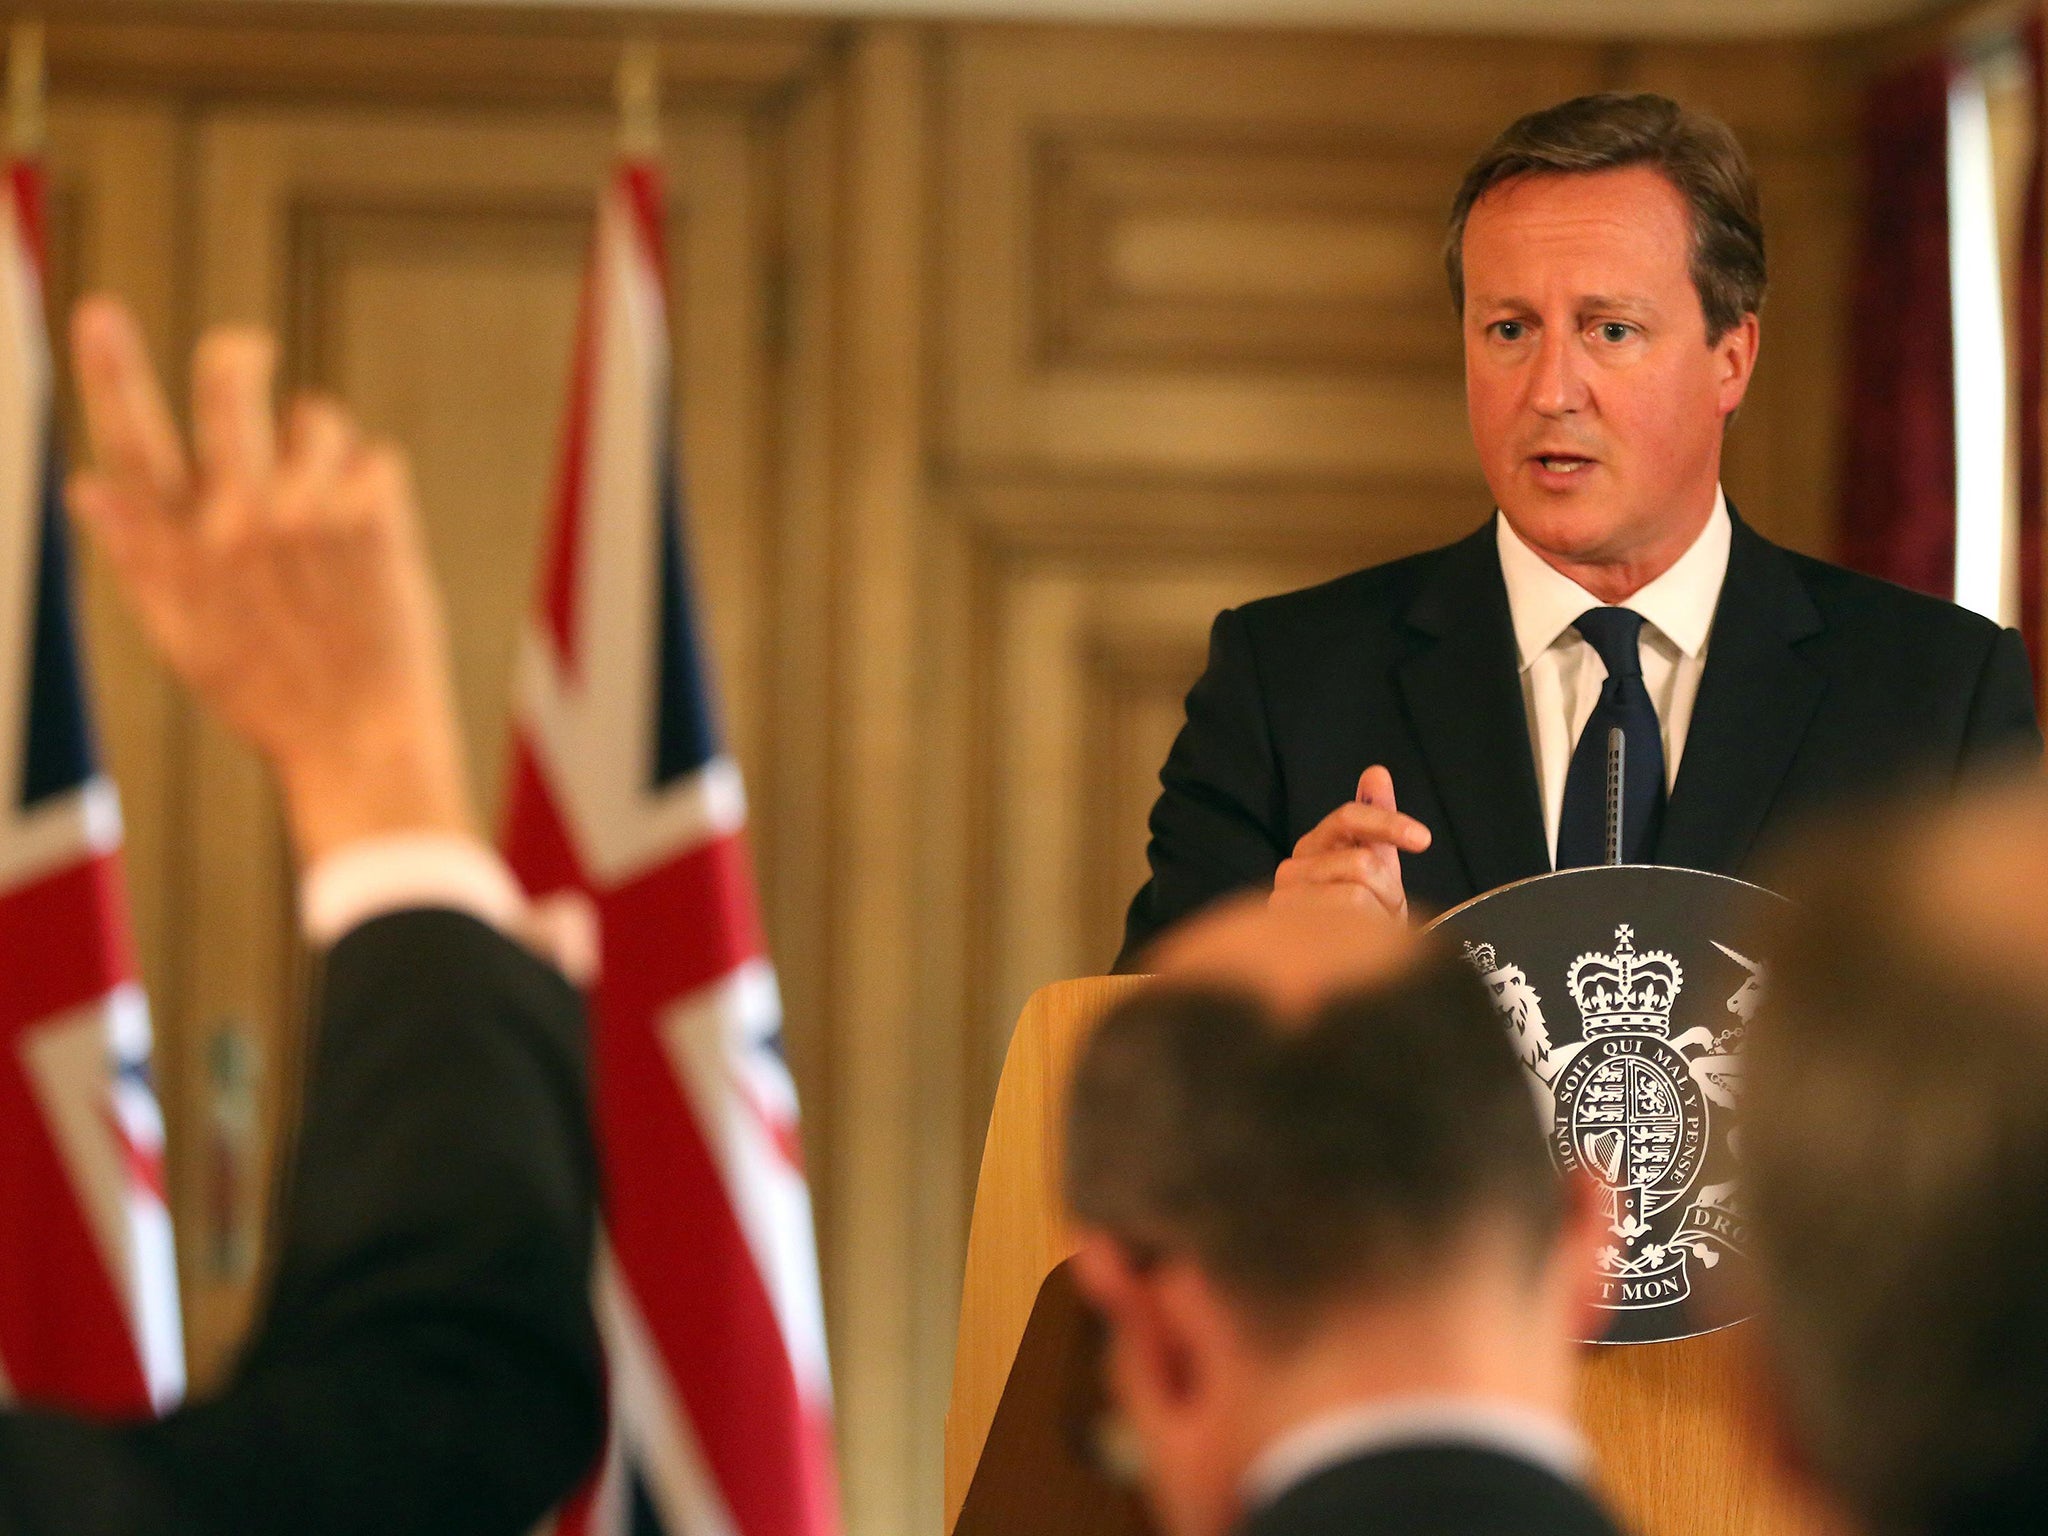 Cameron has made no real attempt to explain what, beyond killing very nasty people, he perceives as his strategic intent